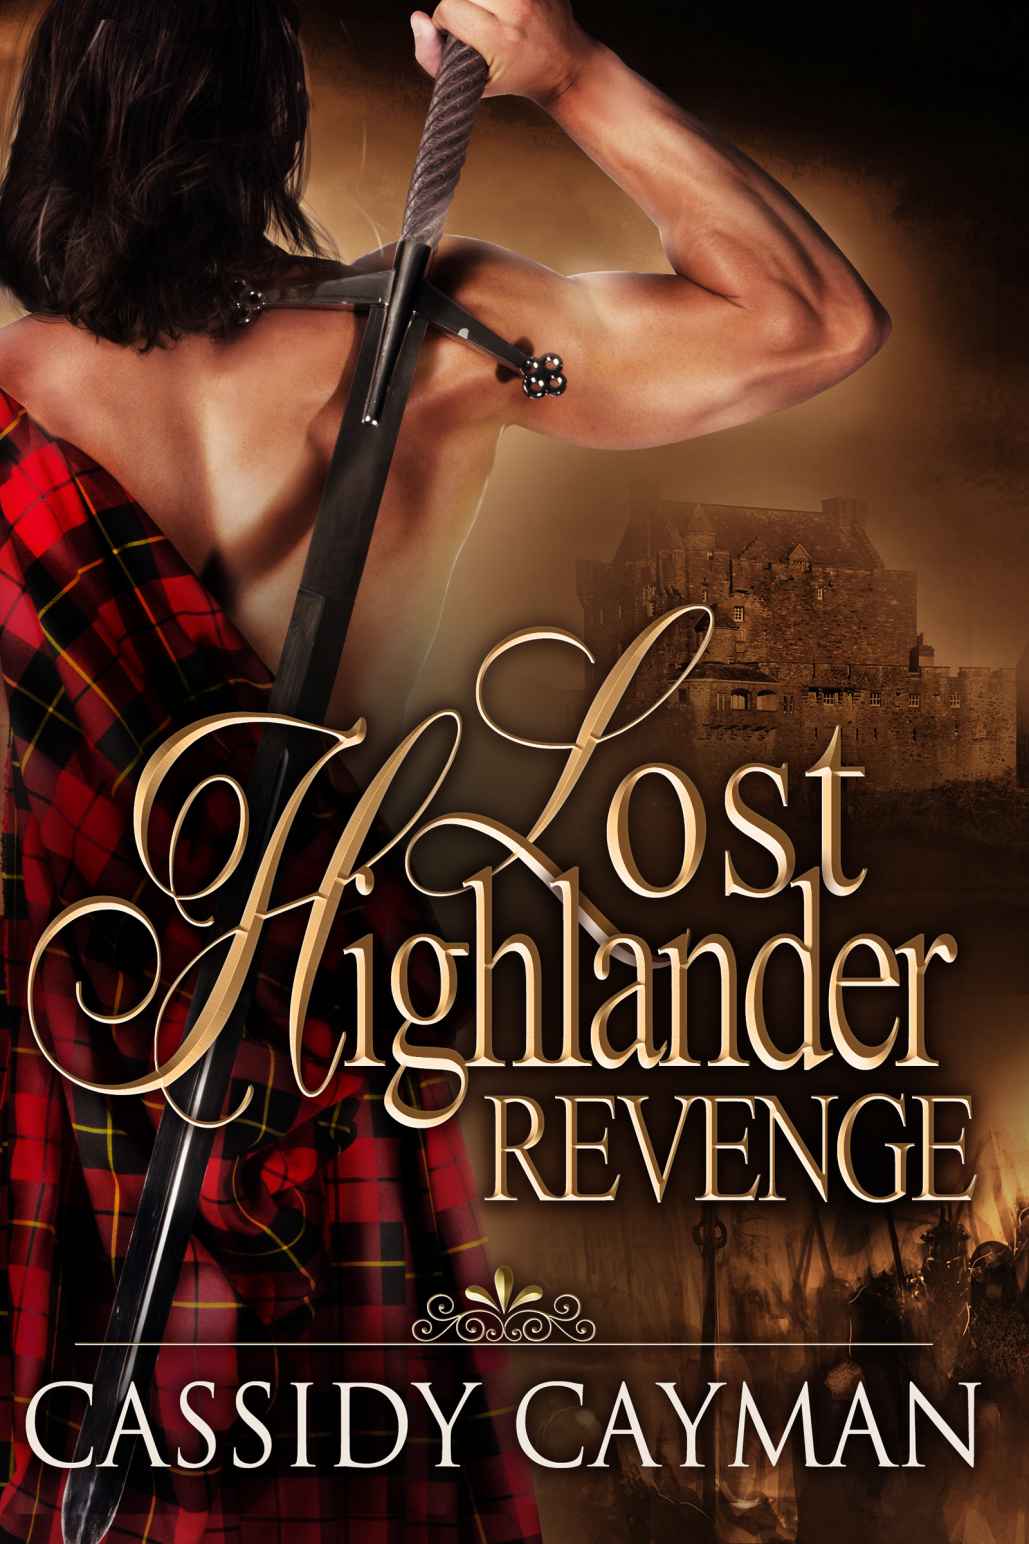 Revenge (Book 3 of Lost Highlander series) by Cassidy Cayman